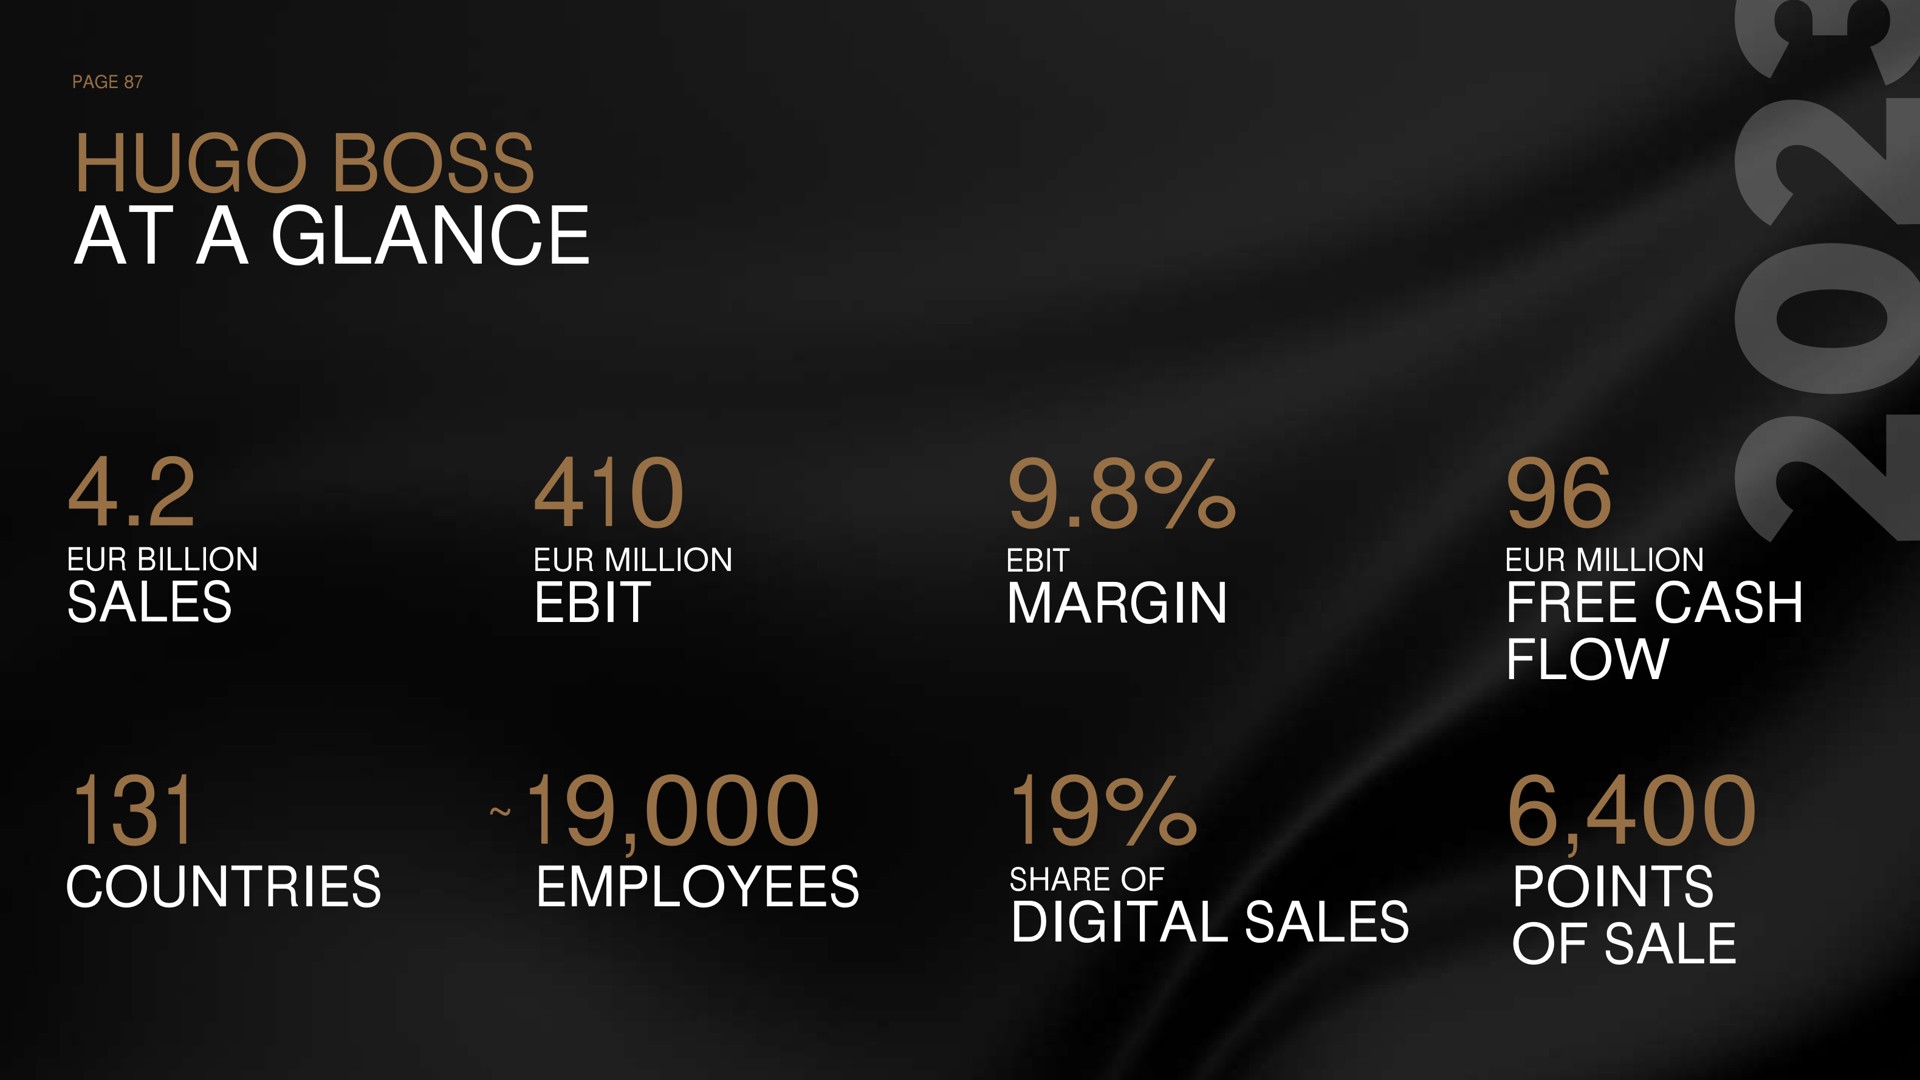 boss at a glance sales margin free cash flow countries employees digital sales points of sale million i share | Hugo Boss